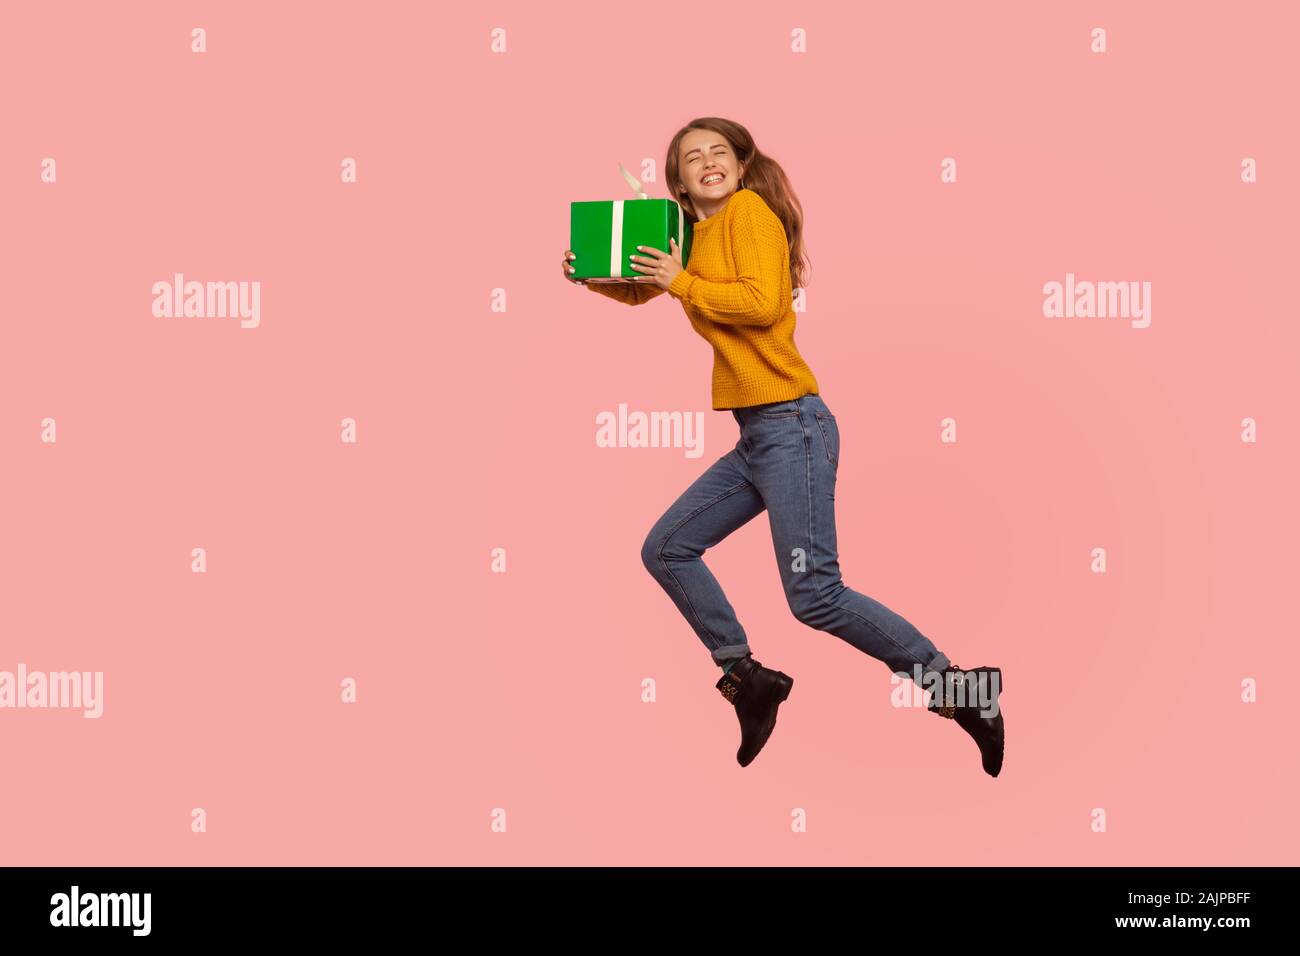 Portrait of extremely happy ginger girl in sweater and denim jumping in air with gift box, full of energy and enthusiasm flying with holiday present. Stock Photo